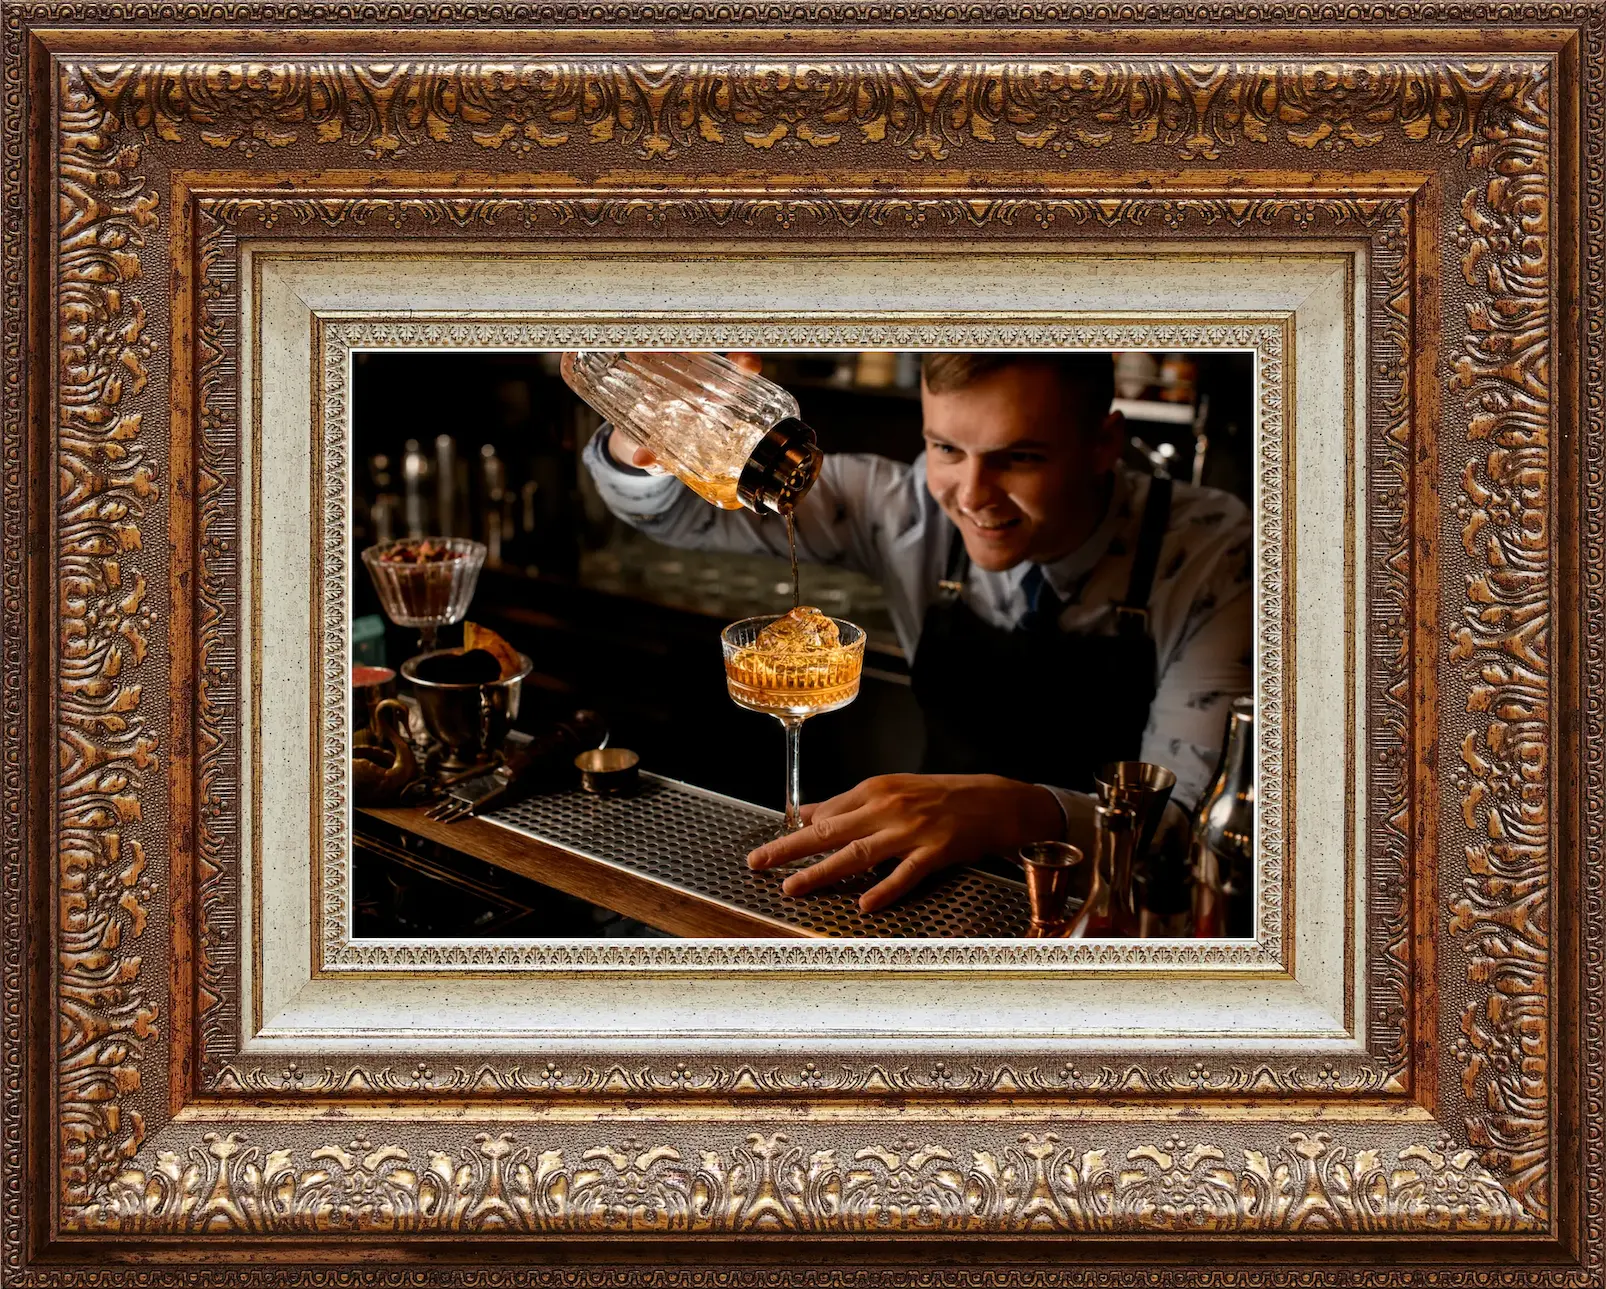 Image of mixologist hired for an event making a cocktail